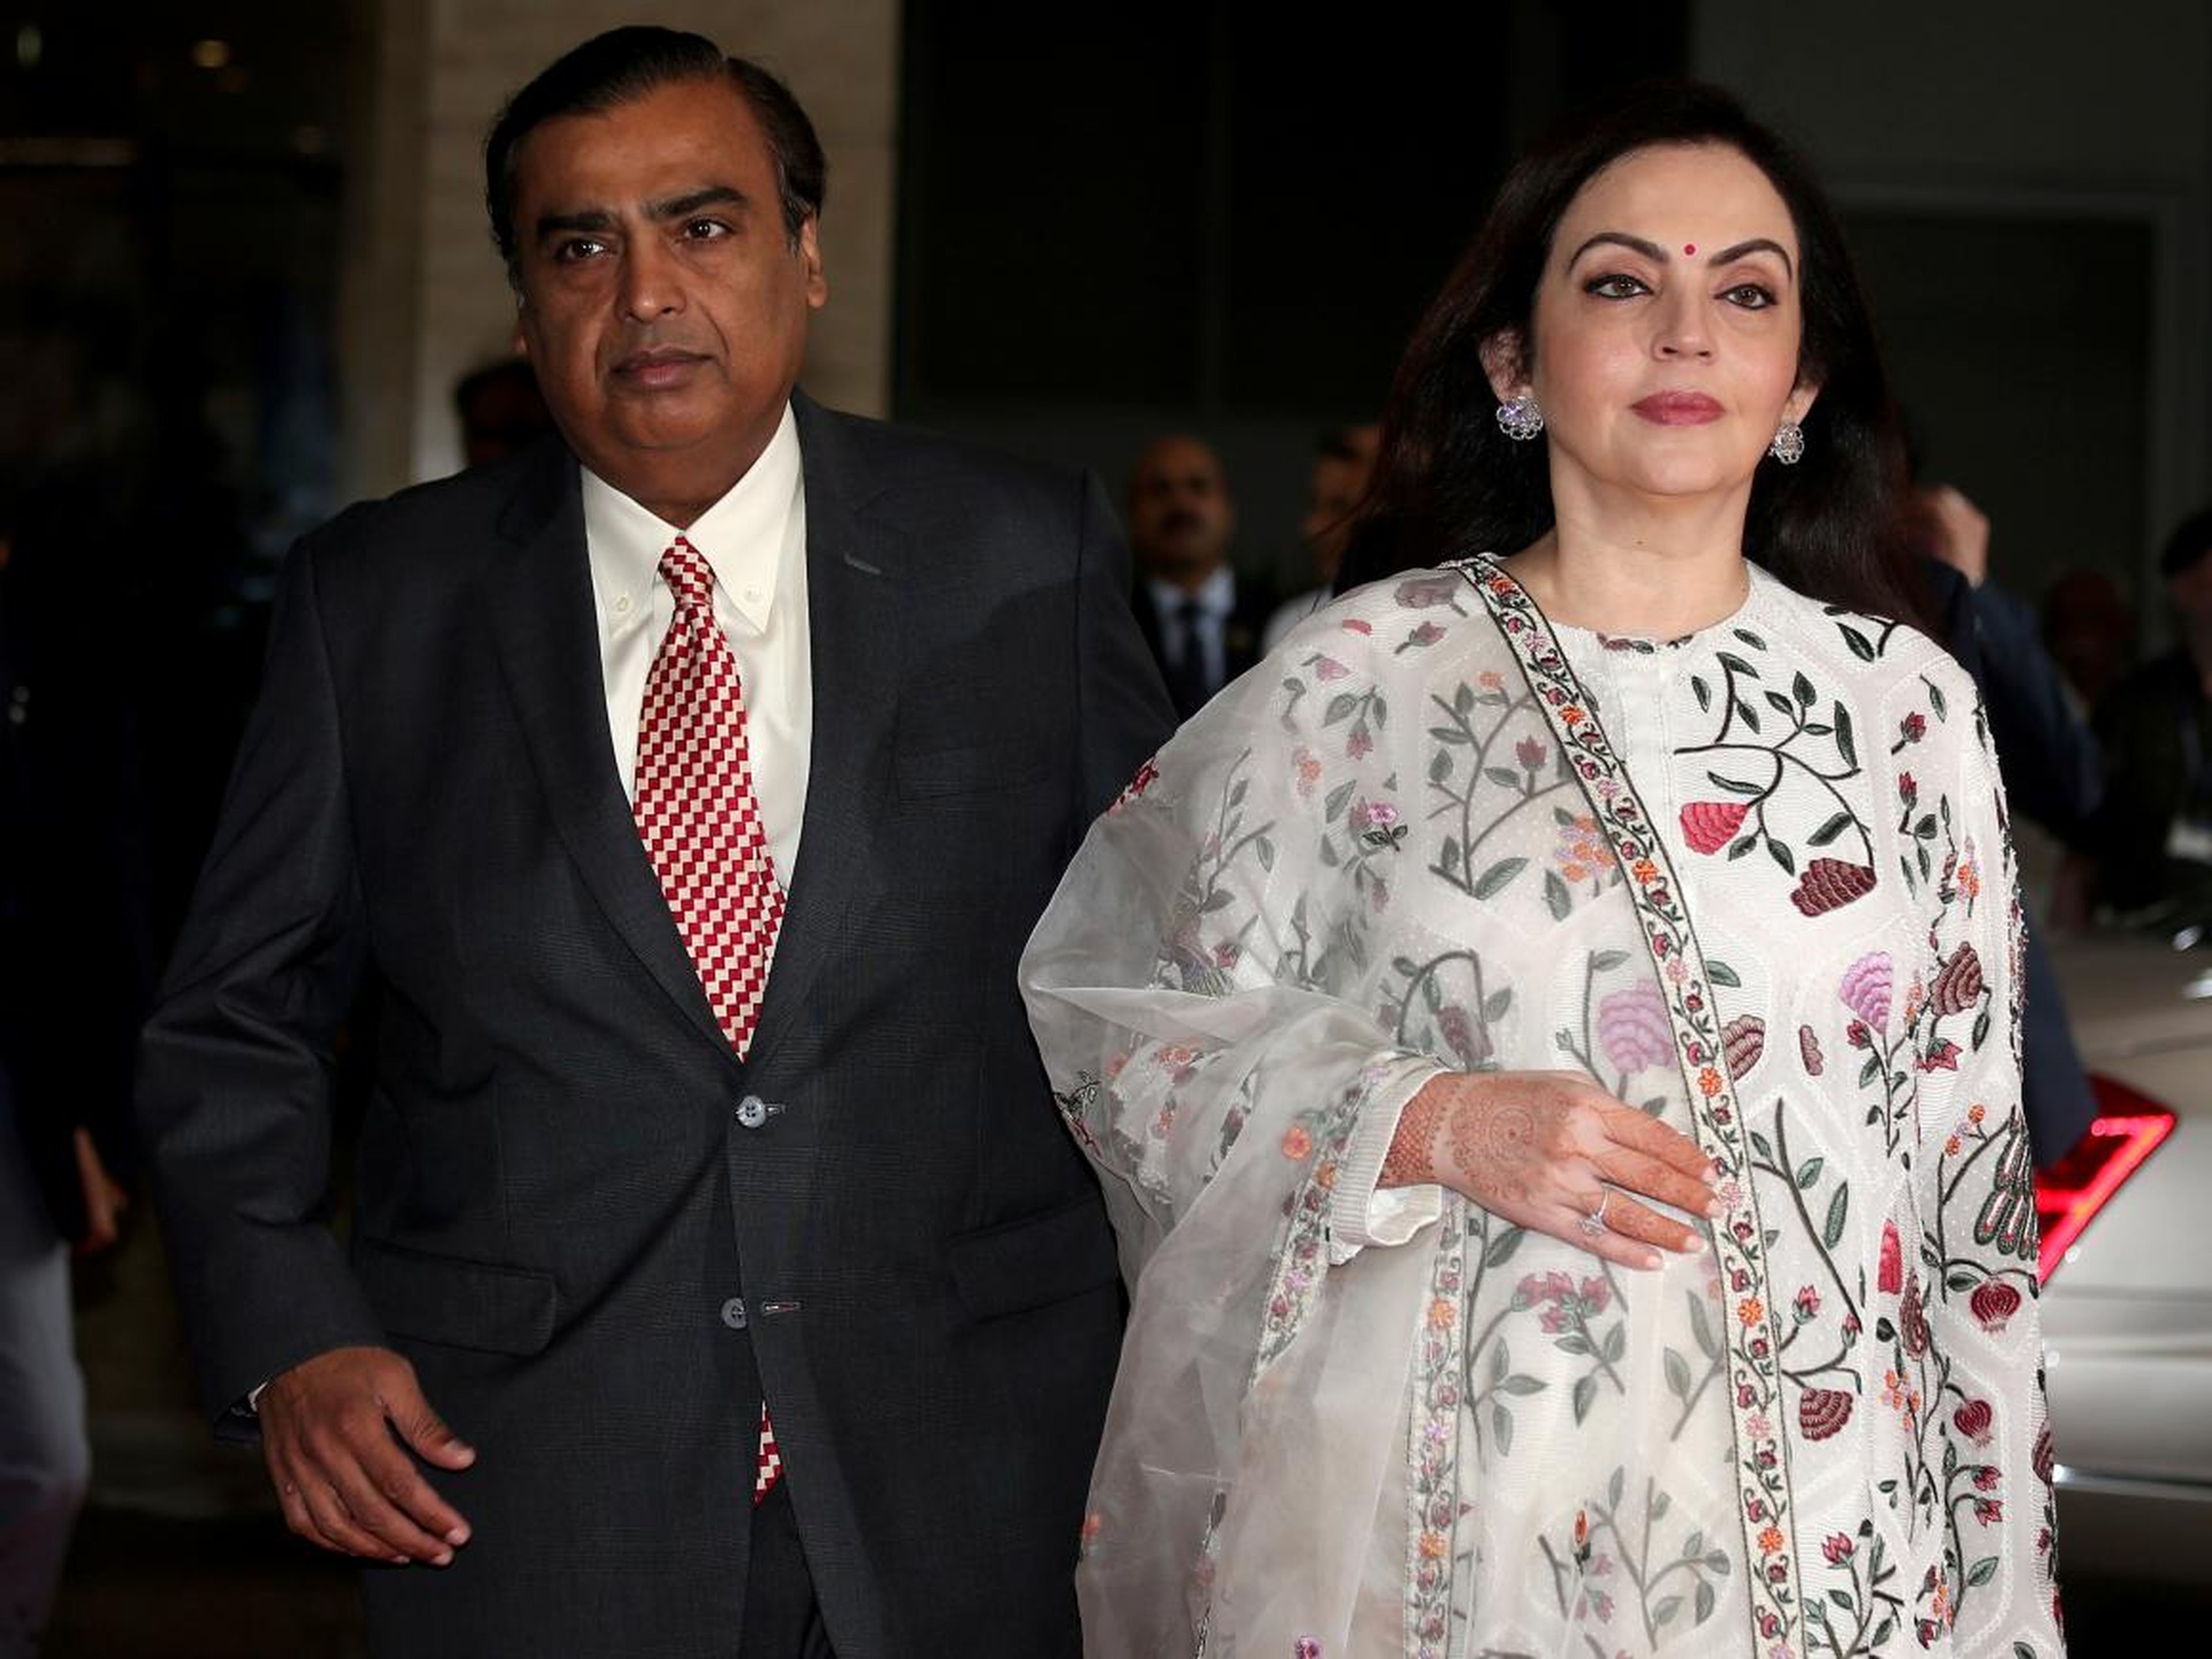 Mukesh Ambani is married to Nita Ambani, who Forbes called "The First Lady Of Indian Business" in 2016.